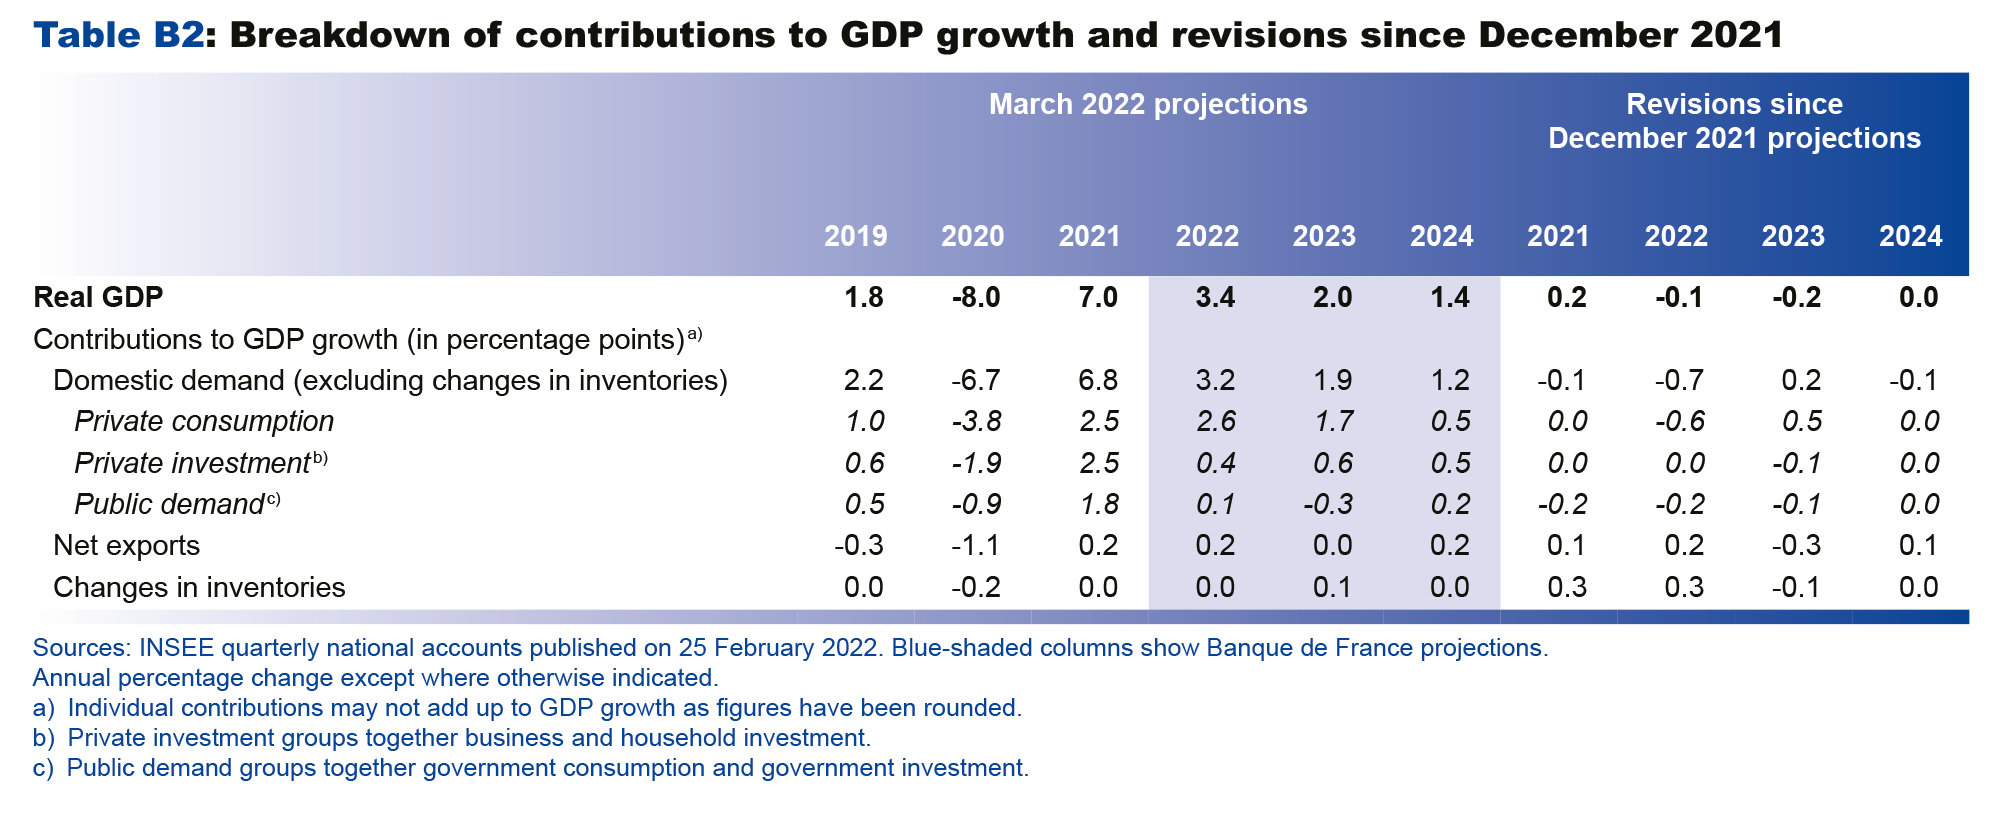 Macroeconomic projections – March 2022 - Breakdown of contributions to GDP growth and revisions since december 2021